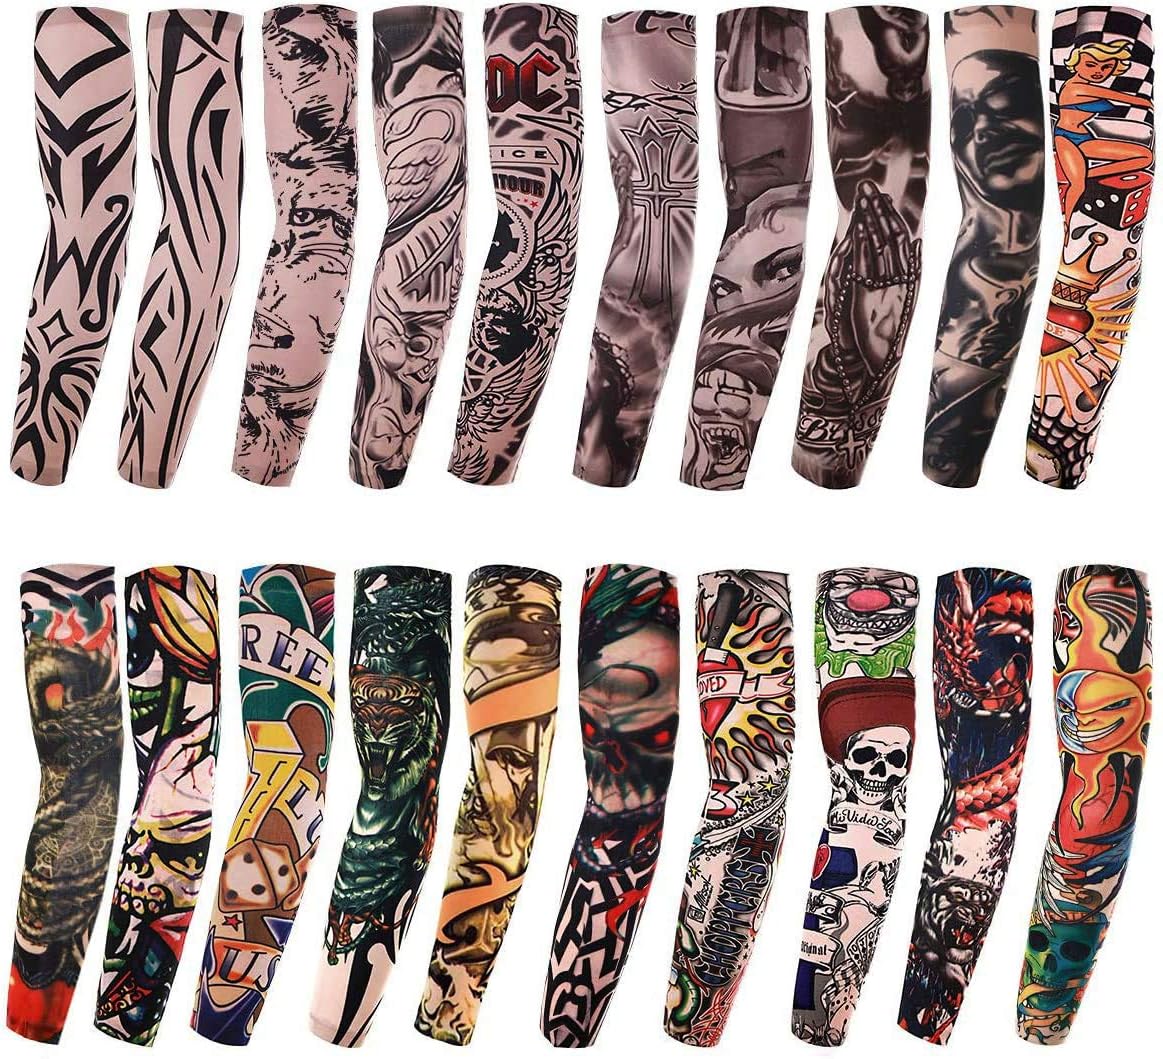 AKStore 20PCS Set Arts Fake Temporary Tattoo Arm Sunscreen Sleeves Designs Tiger, Crown Heart, Skull, Tribal and Etc